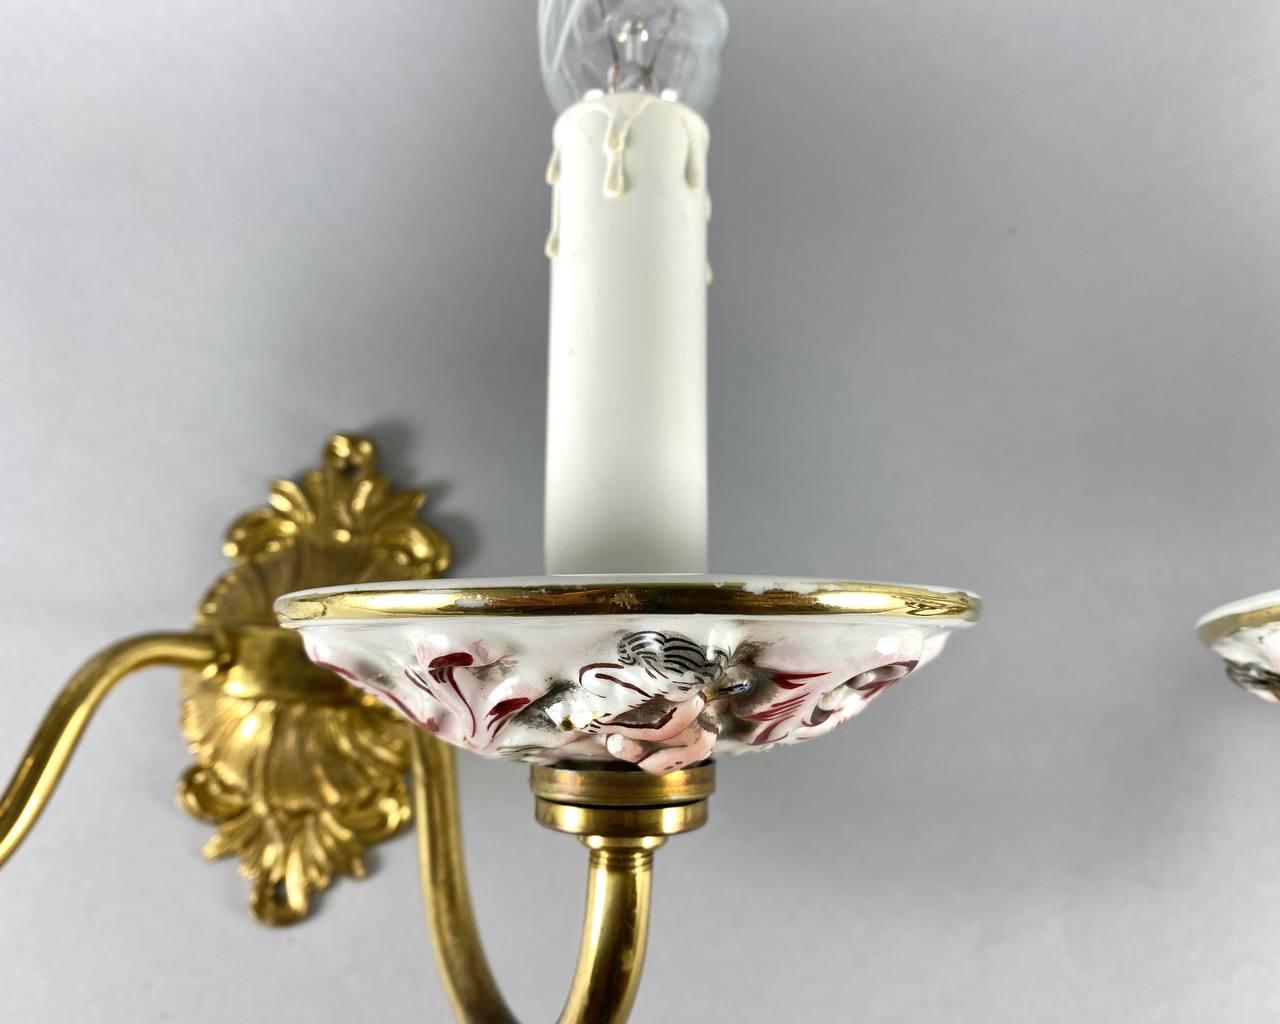 Italian Vintage Capodimonte Porcelain Wall Sconces with Putti and Floral Pattern, 1980 For Sale